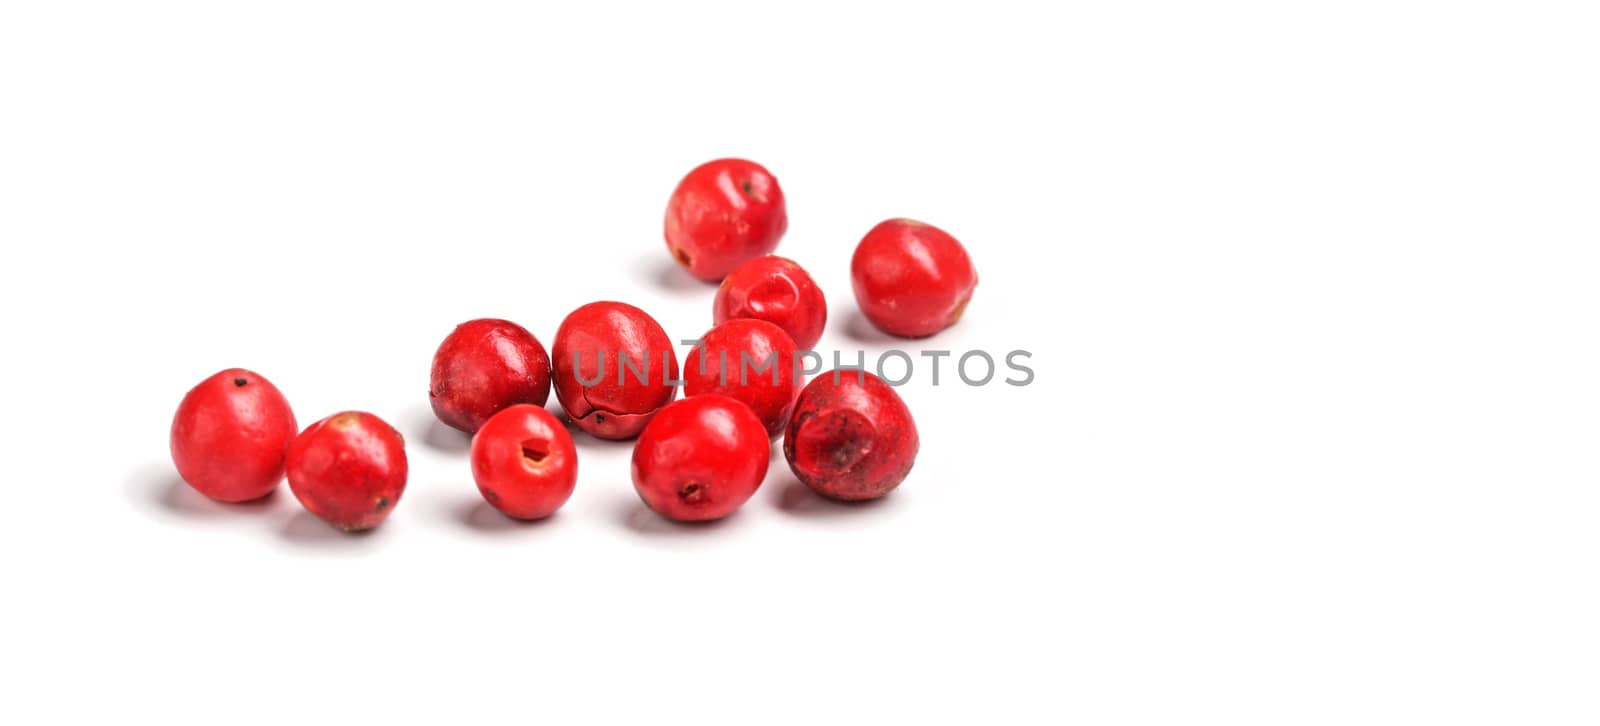 Red or pink peppercorns on board, closeup photo isolated with white background by Ivanko